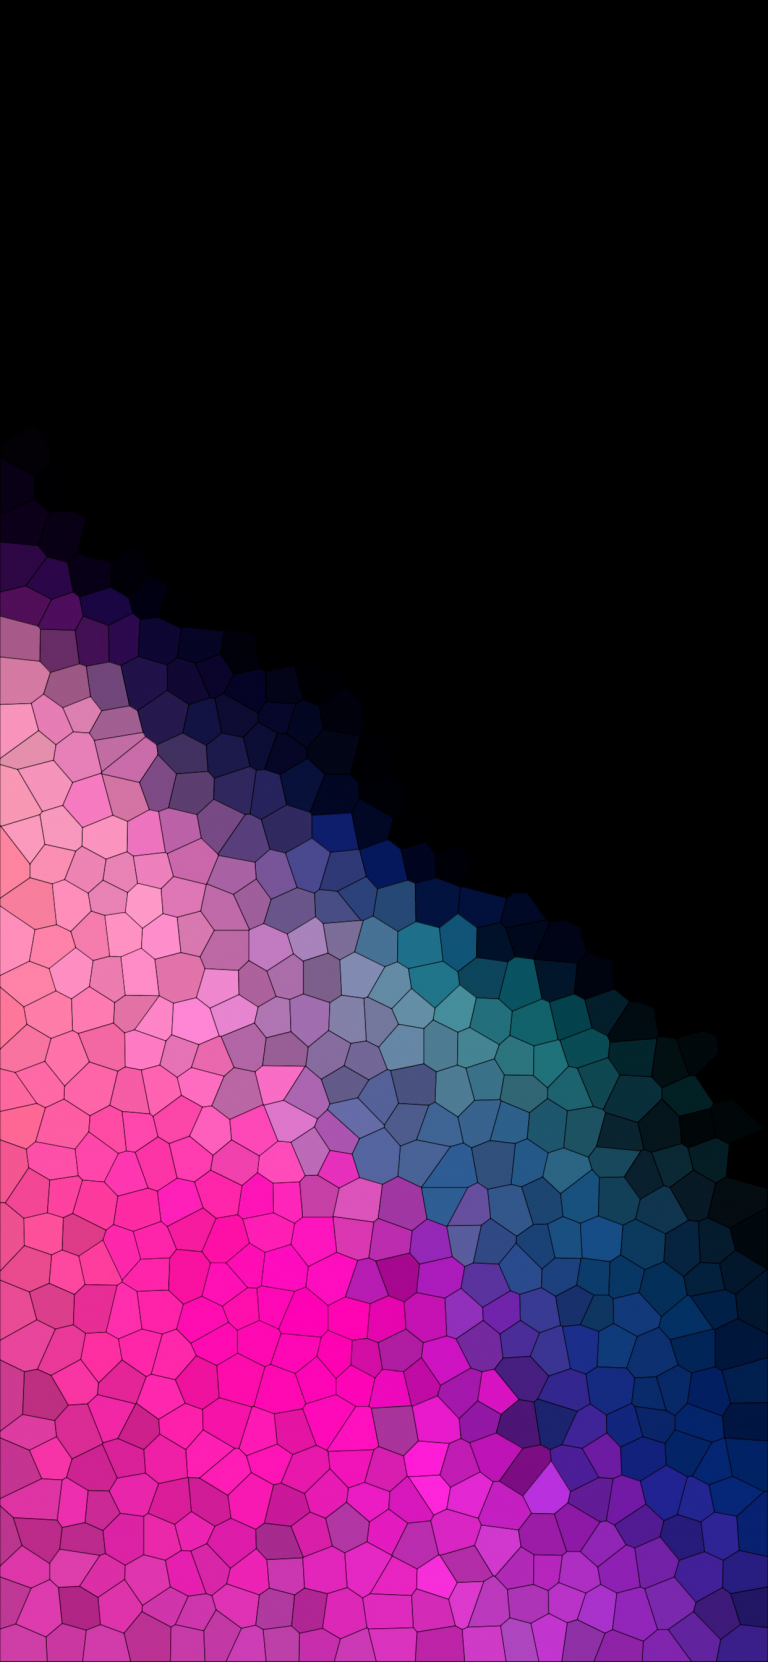 Best Aesthetic Wallpaper Picture for iOS 14: Black, White, Gold, Neon, Red, Blue, Pink, Orange, Green, Purple, and More